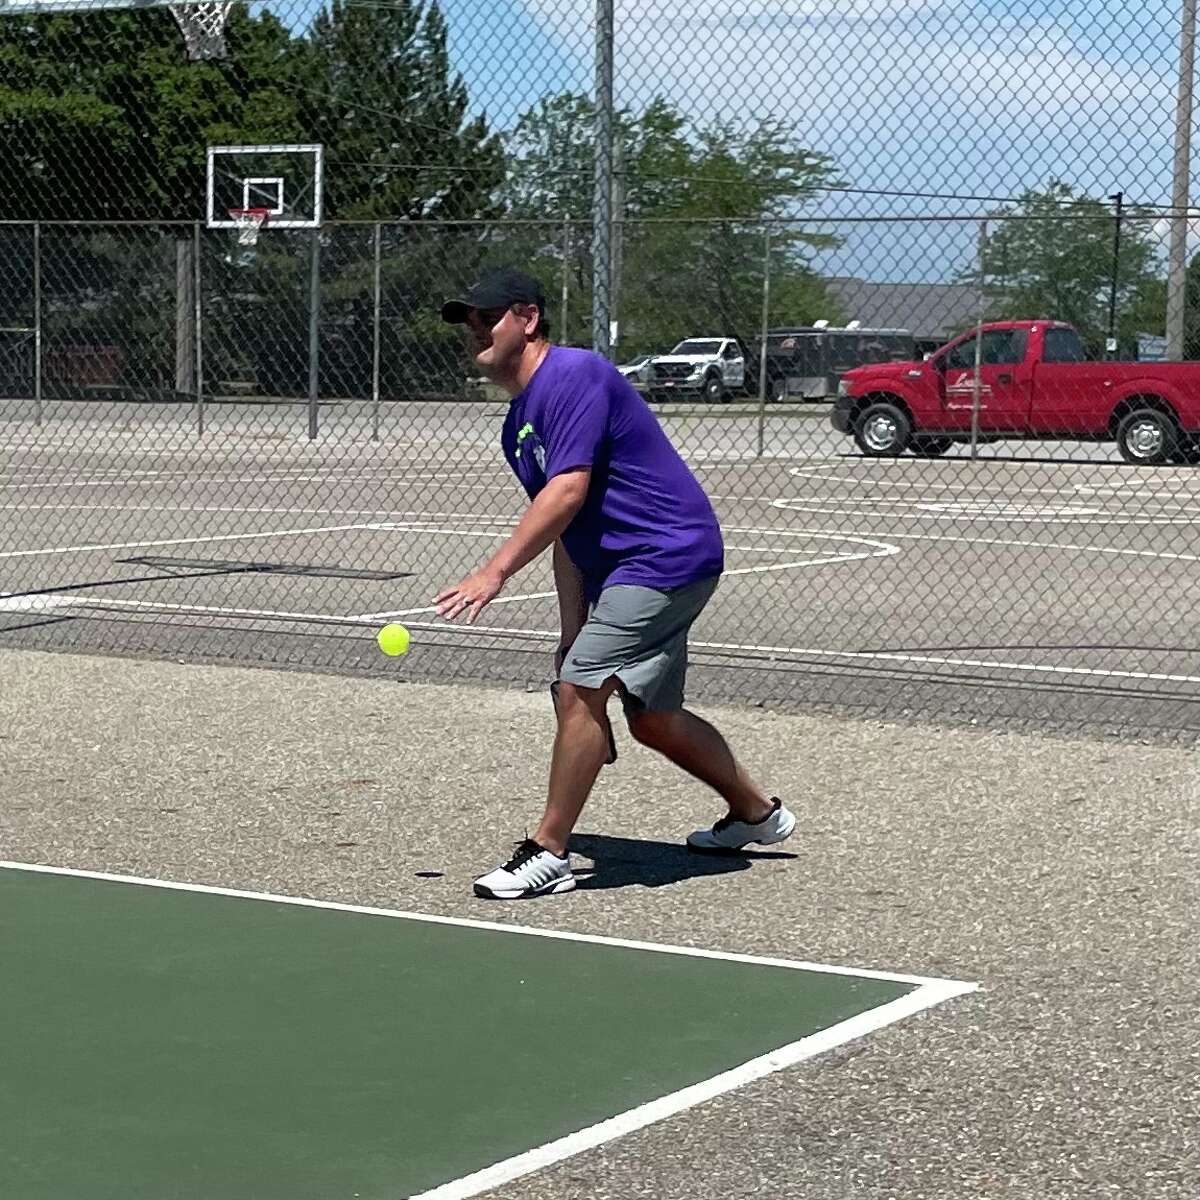 The inaugural Pickleball tournament in Pigeon was held Tuesday, July 19.